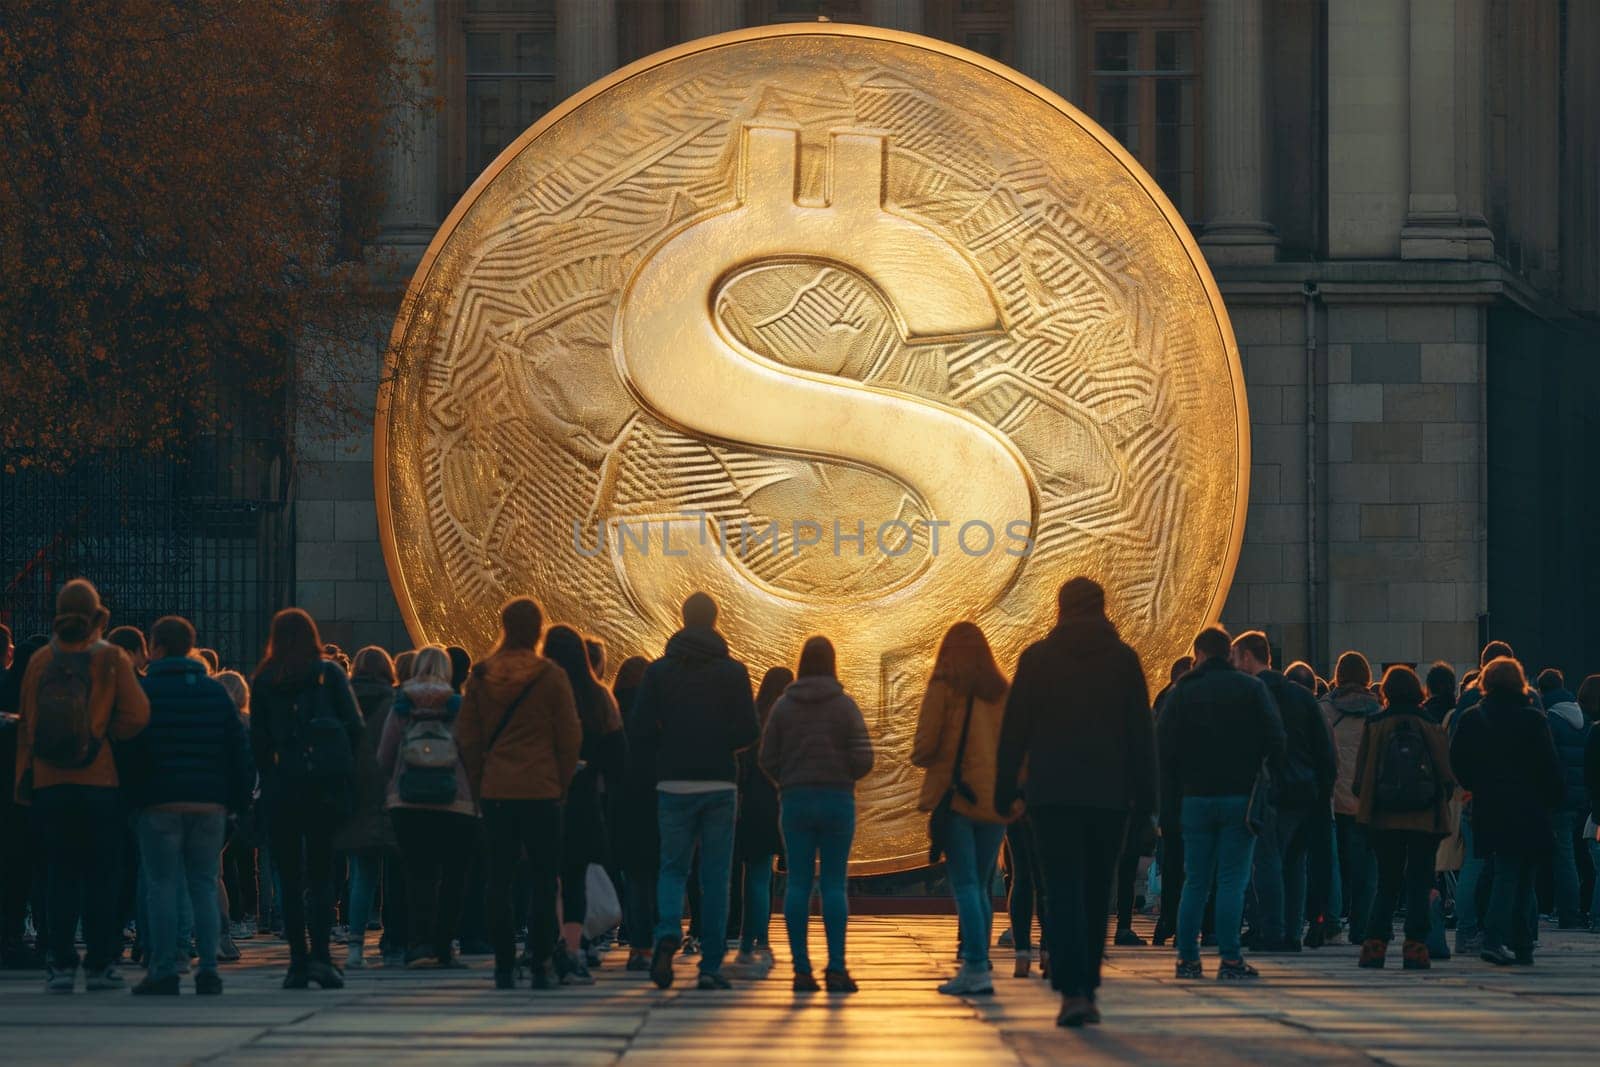 Large Golden Dollar Sign in Front of Crowd by Sd28DimoN_1976